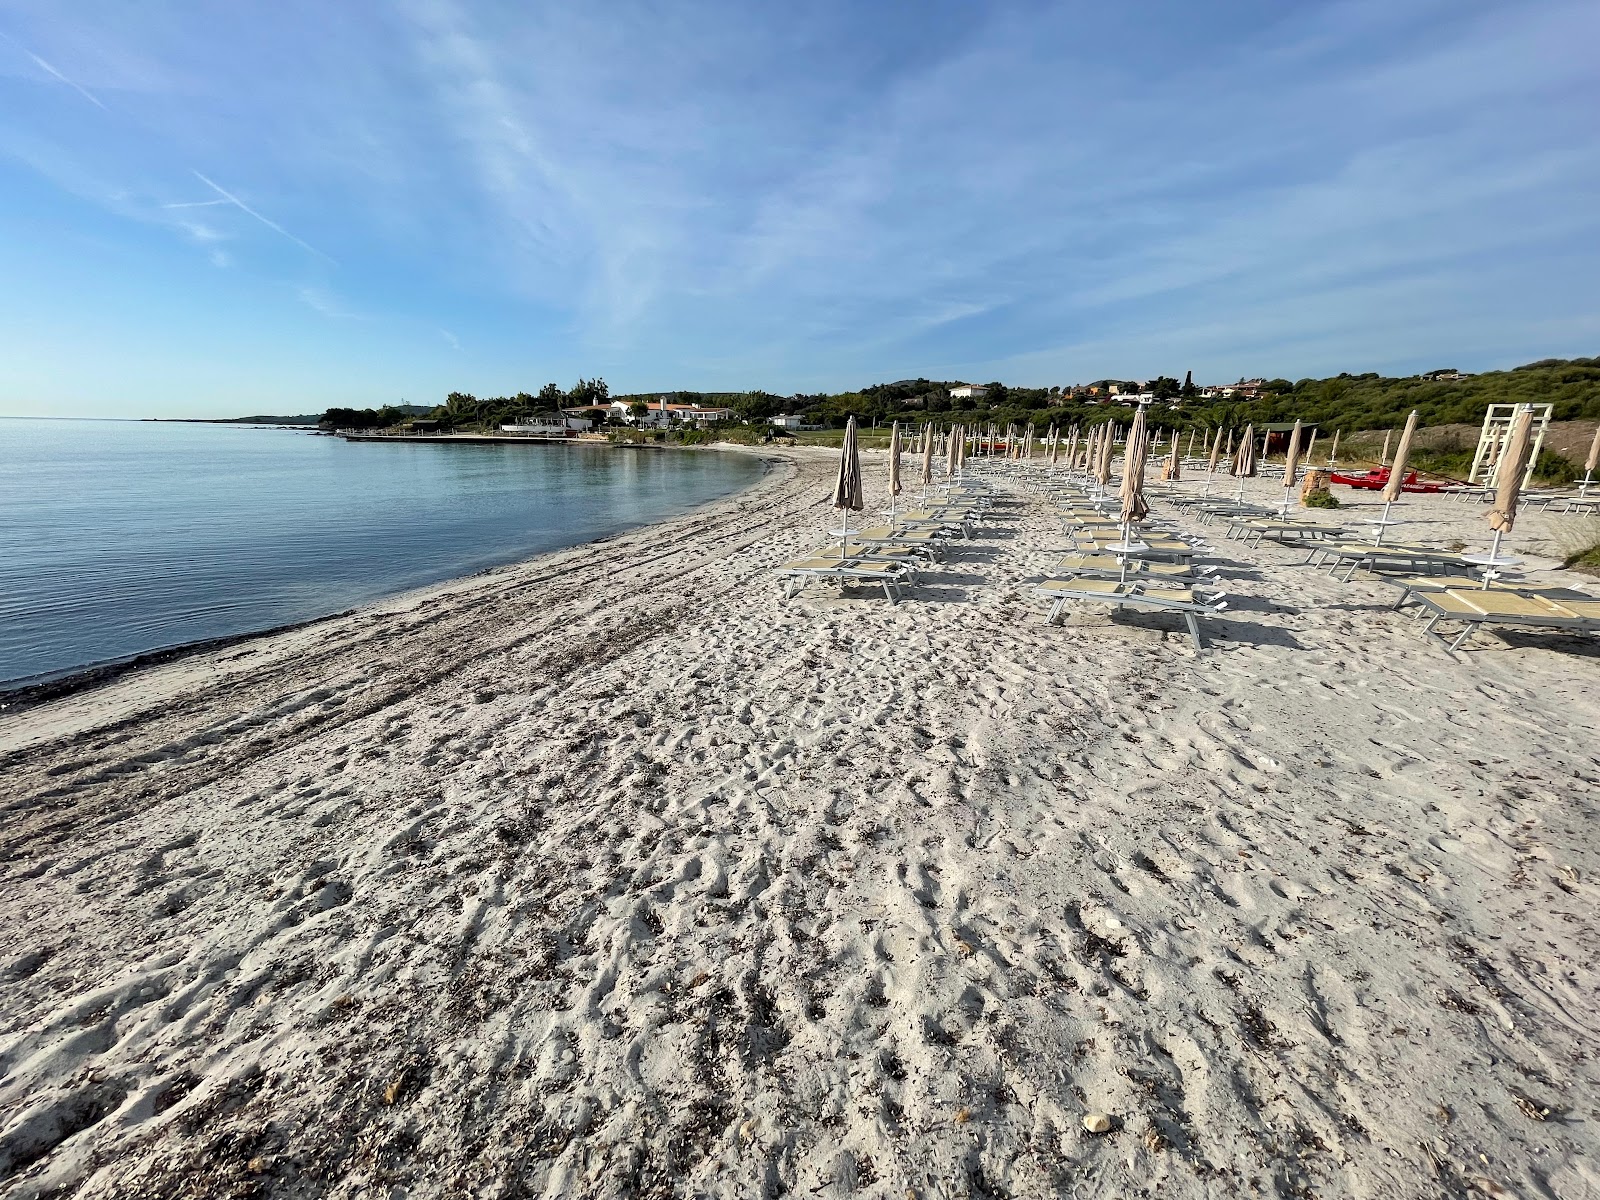 Photo of Spiaggia del Veraclub Amasea - popular place among relax connoisseurs